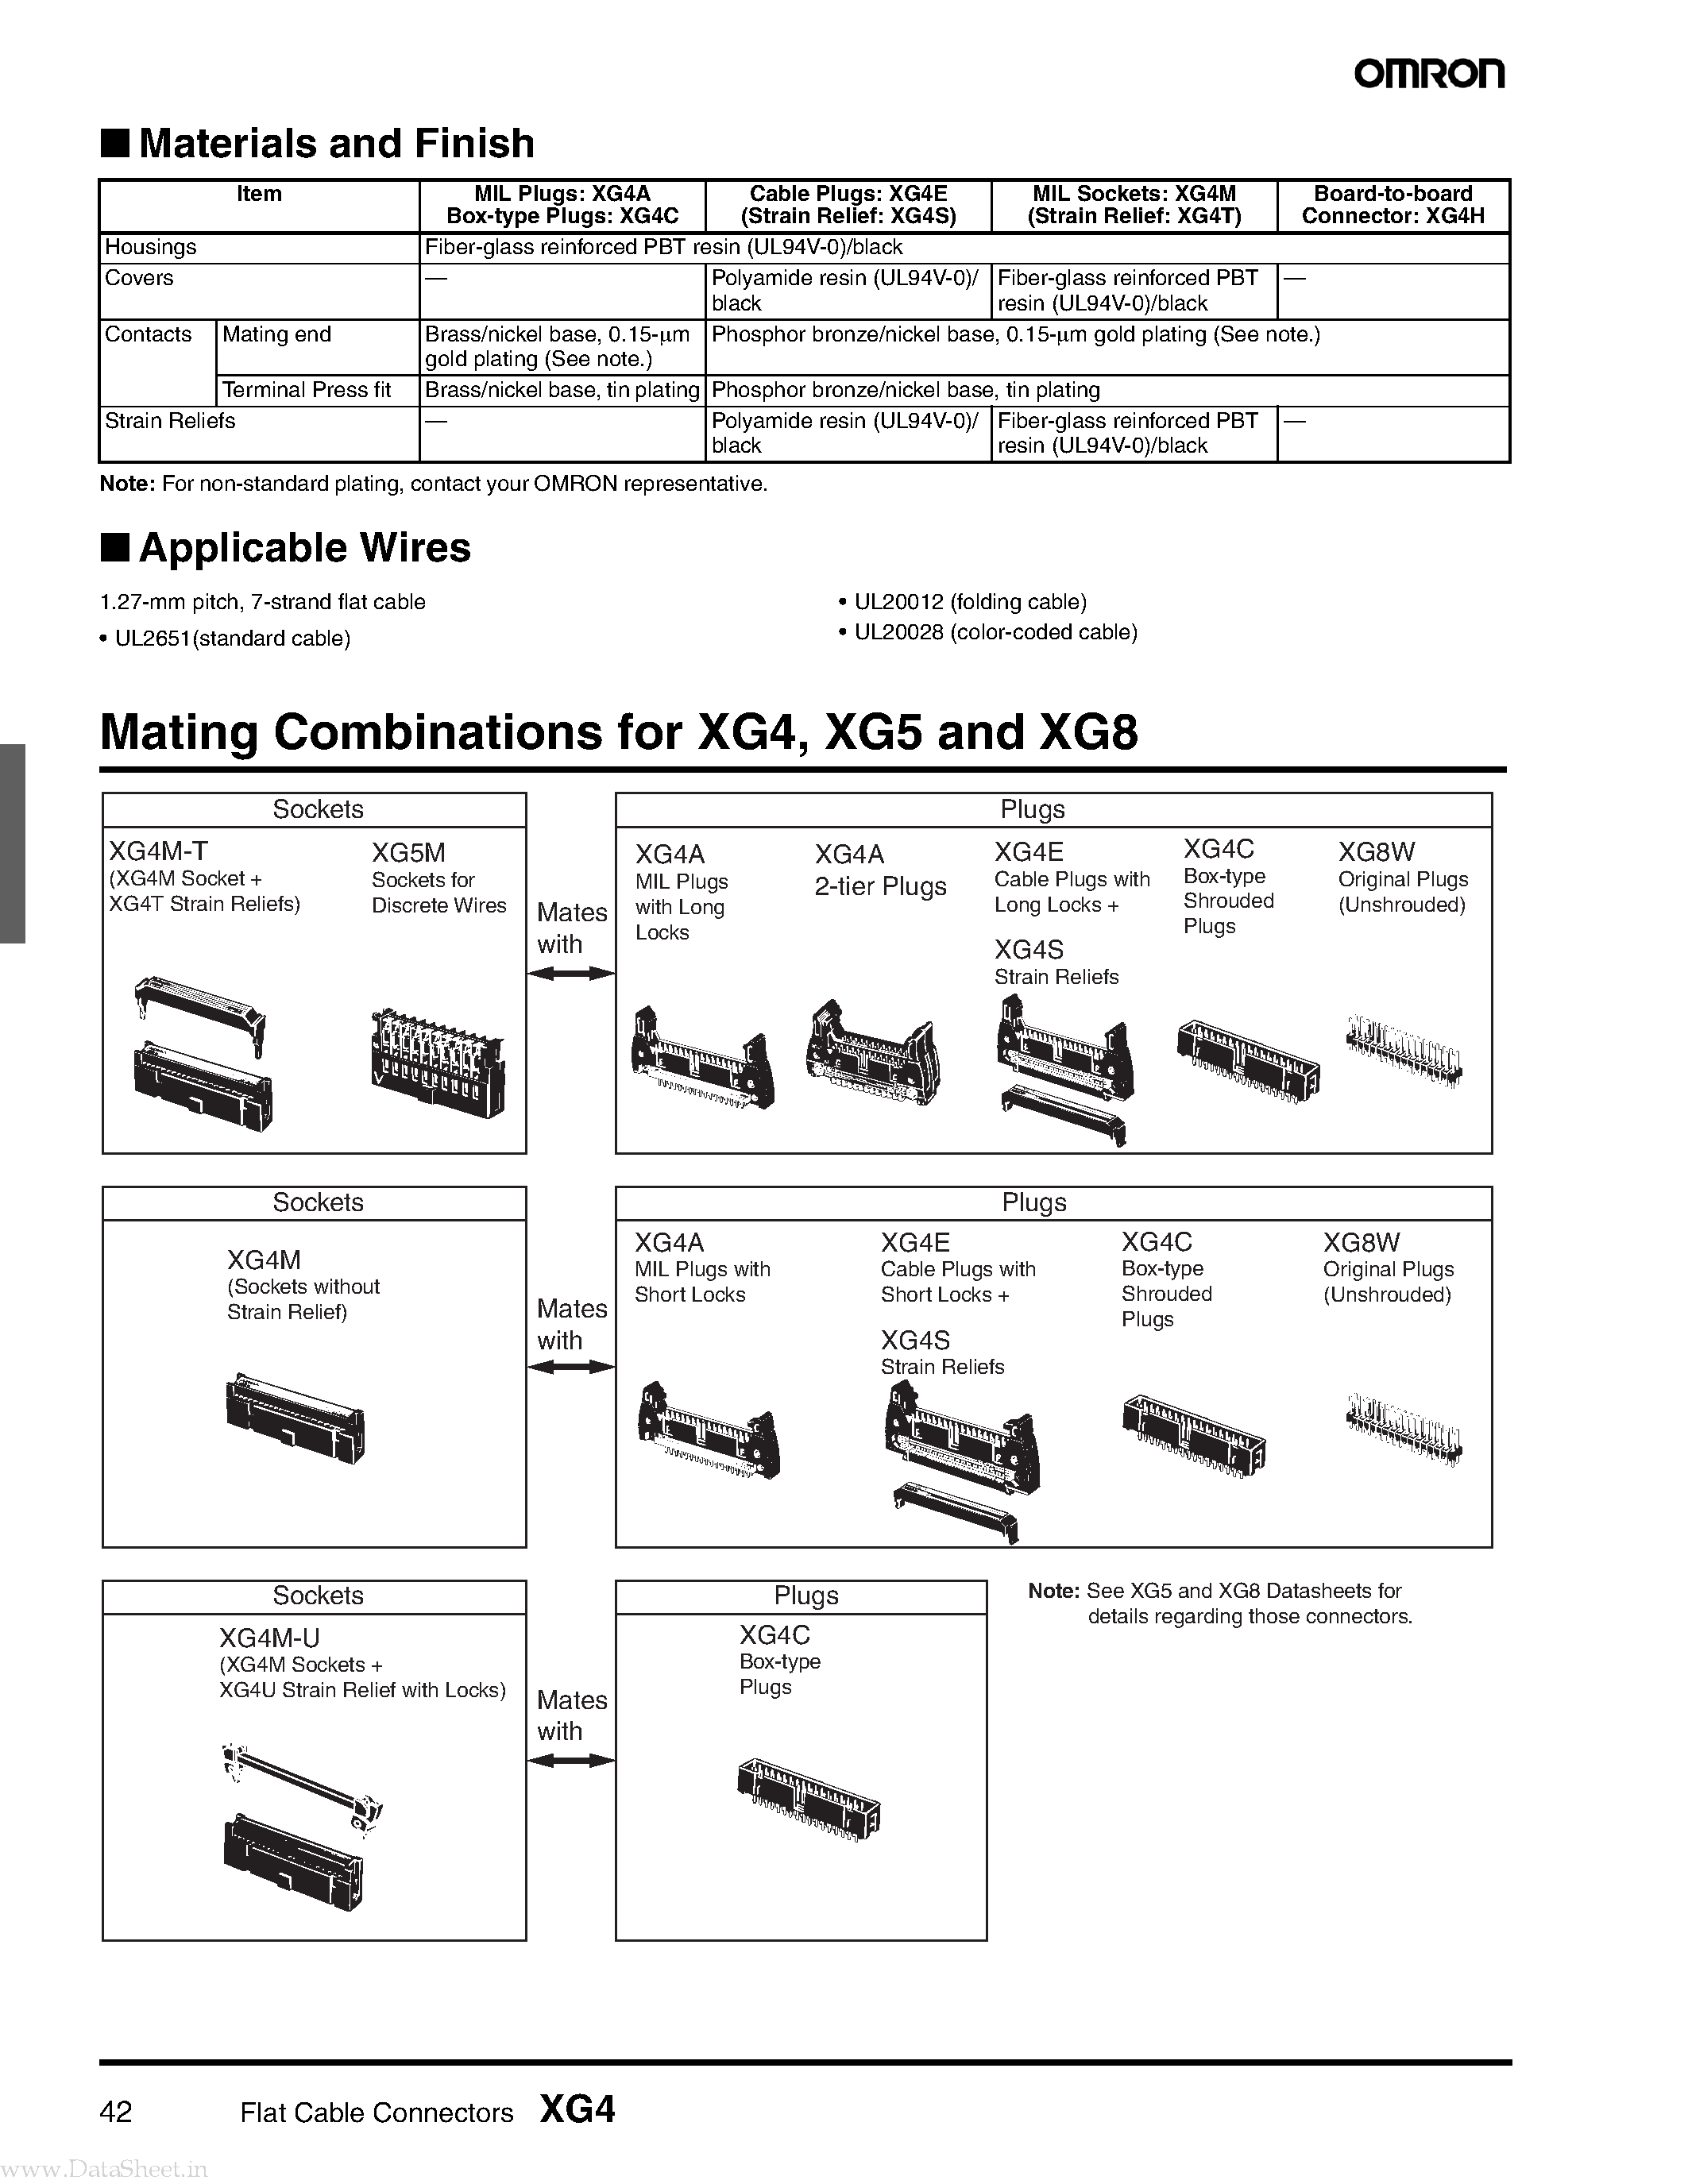 Datasheet XG4 - Flat Cable Connectors page 2